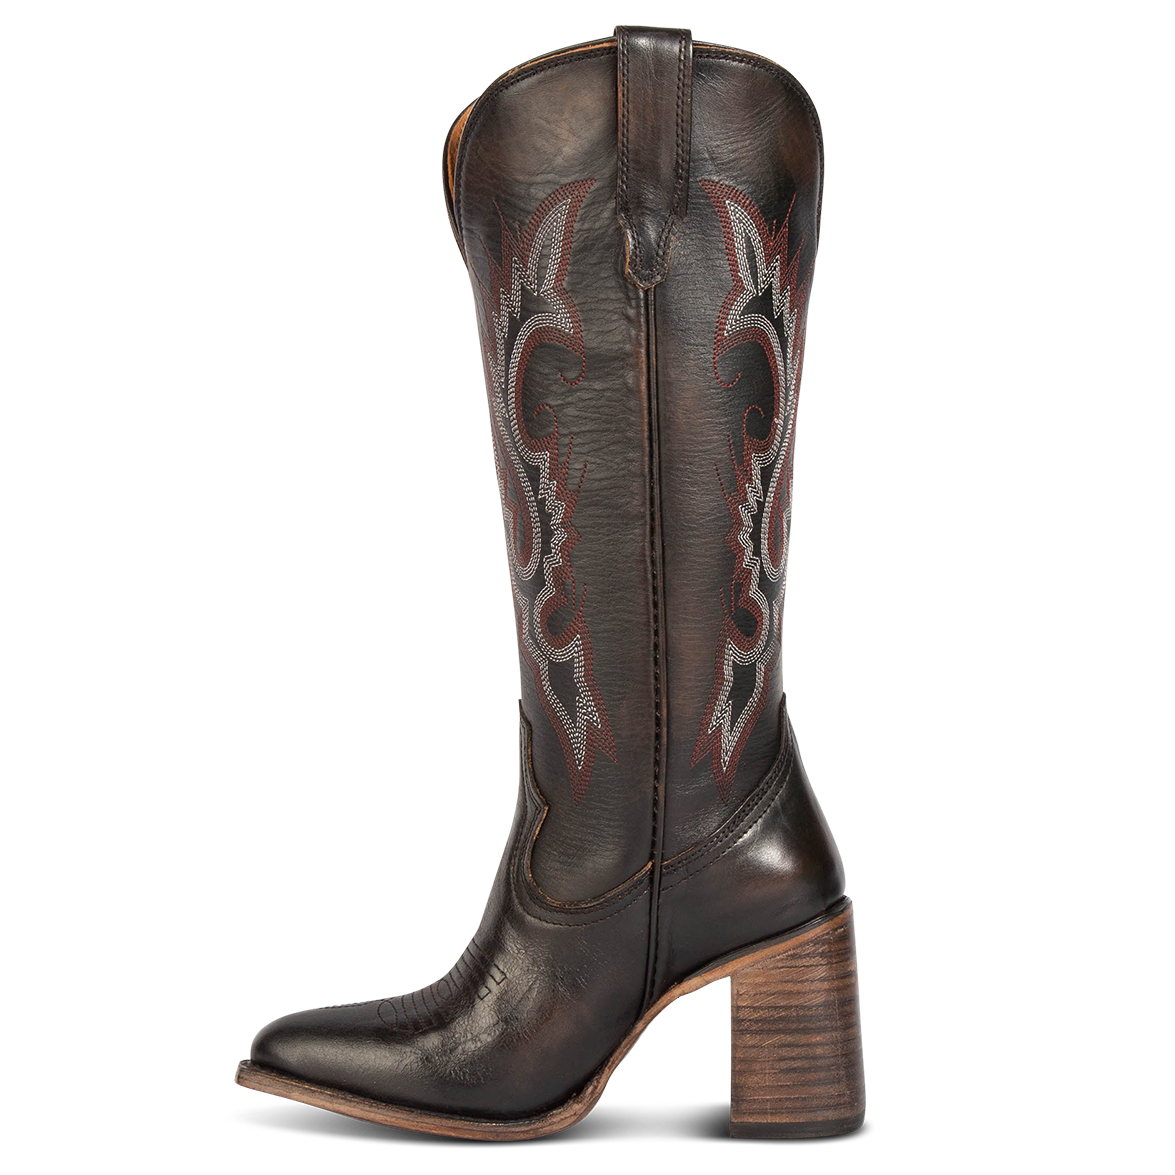 Side view showing leather pull straps and stitch detailing on FREEBIRD women's Jackson black leather high heel western boot